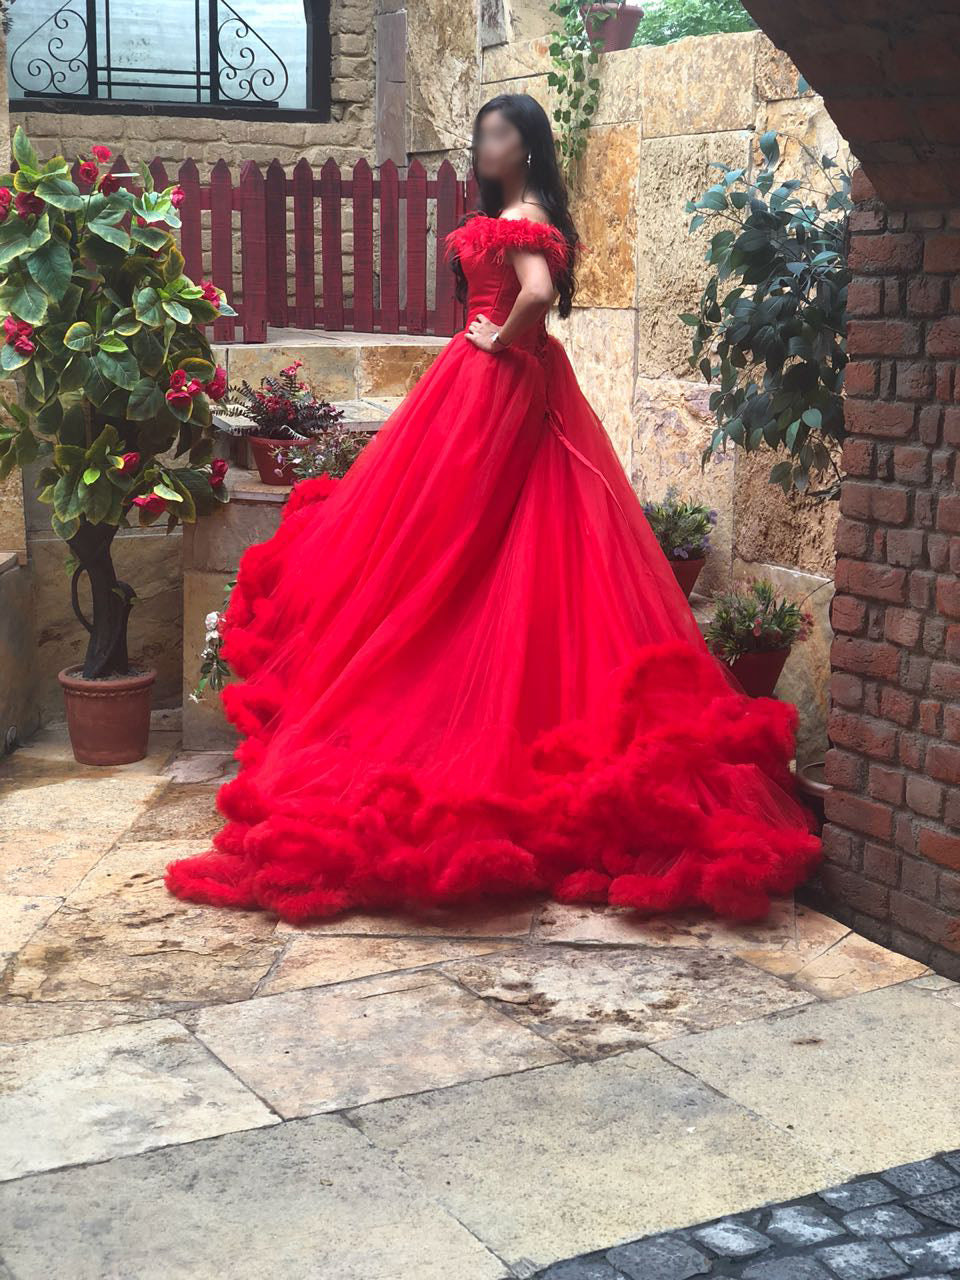 G137, Luxury Red Puffy Cloud Trail Ball Gown, Size: All, Color: All